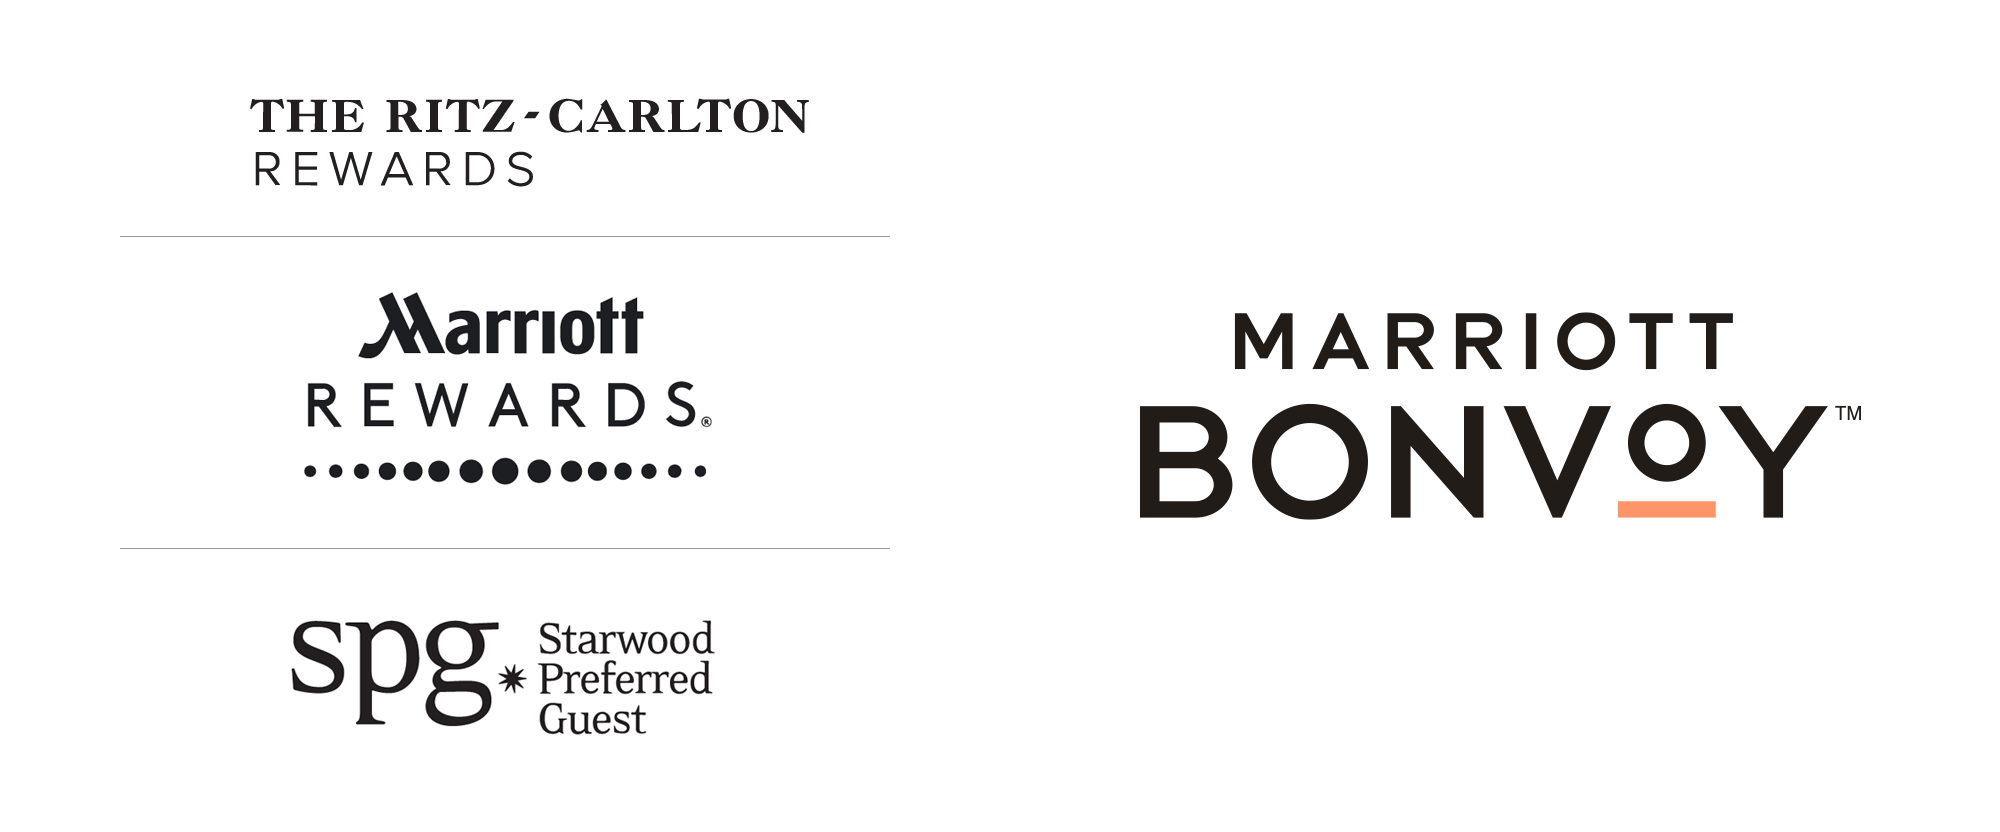 New Name and Logo for Marriott Bonvoy by Mother Design (Updated)